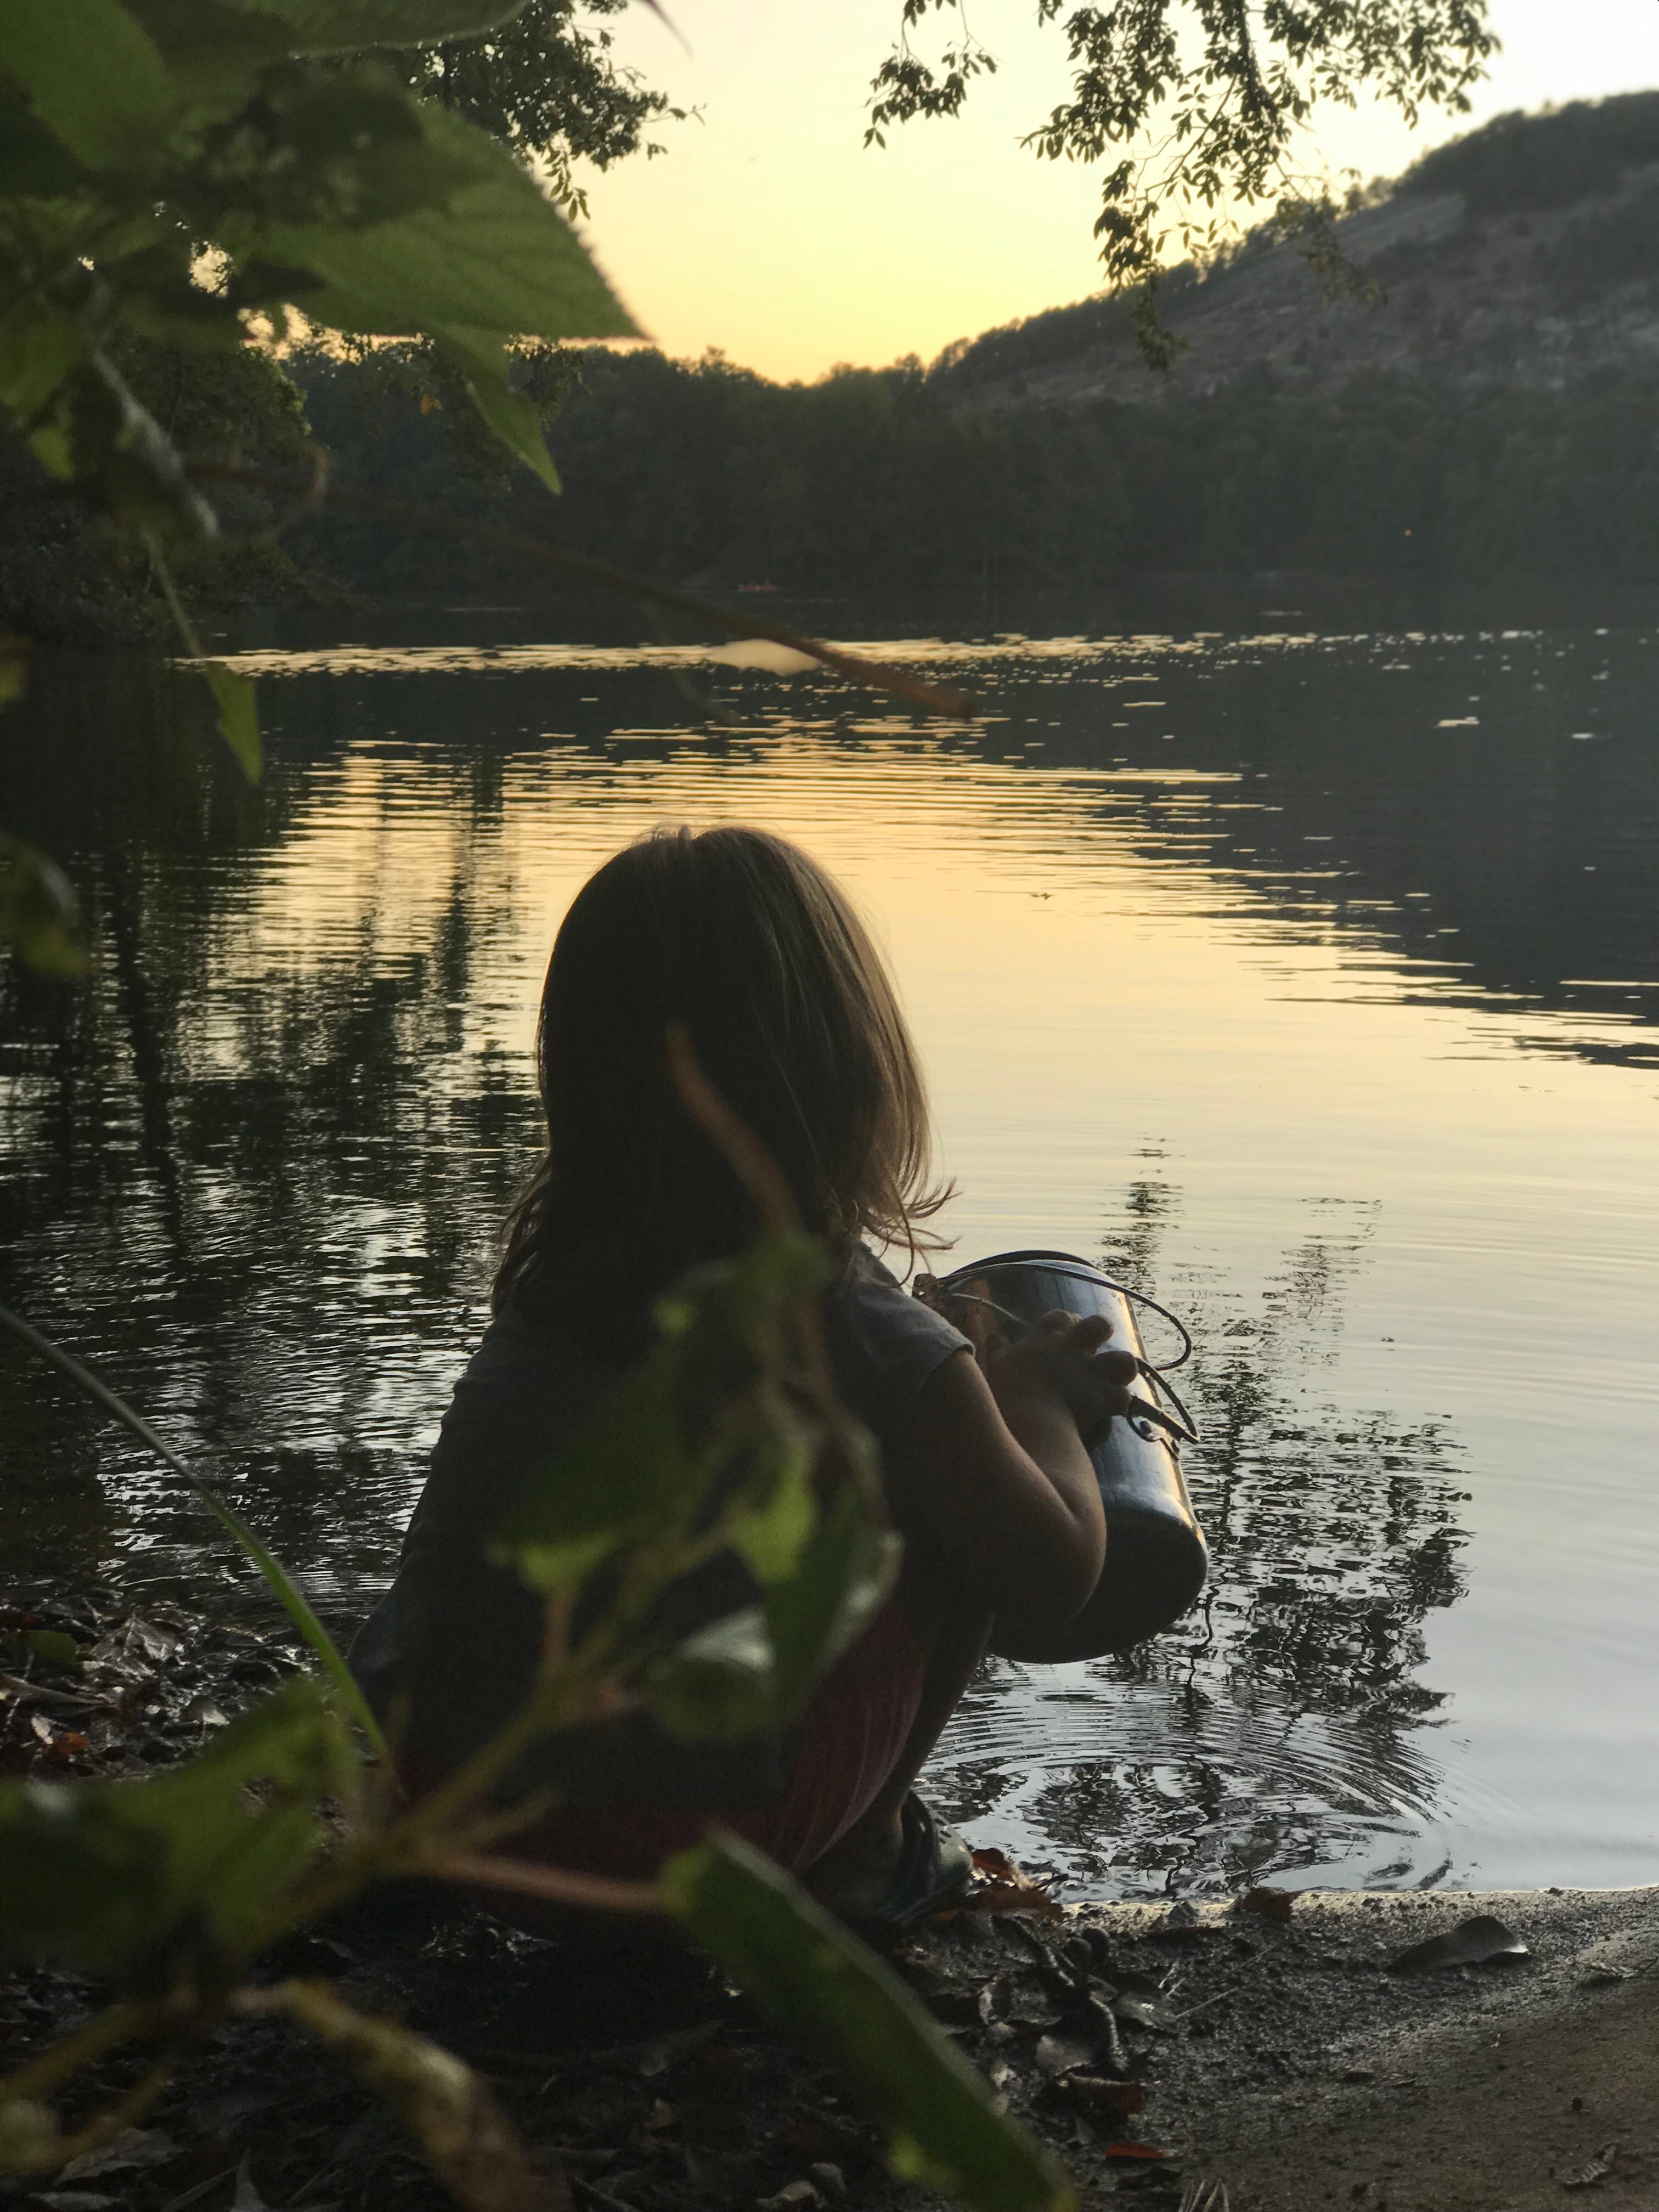 I caught my daughter catching minnows with my coffee tin. Brought me back to my childhood. This site was great for coming down by the water (389)